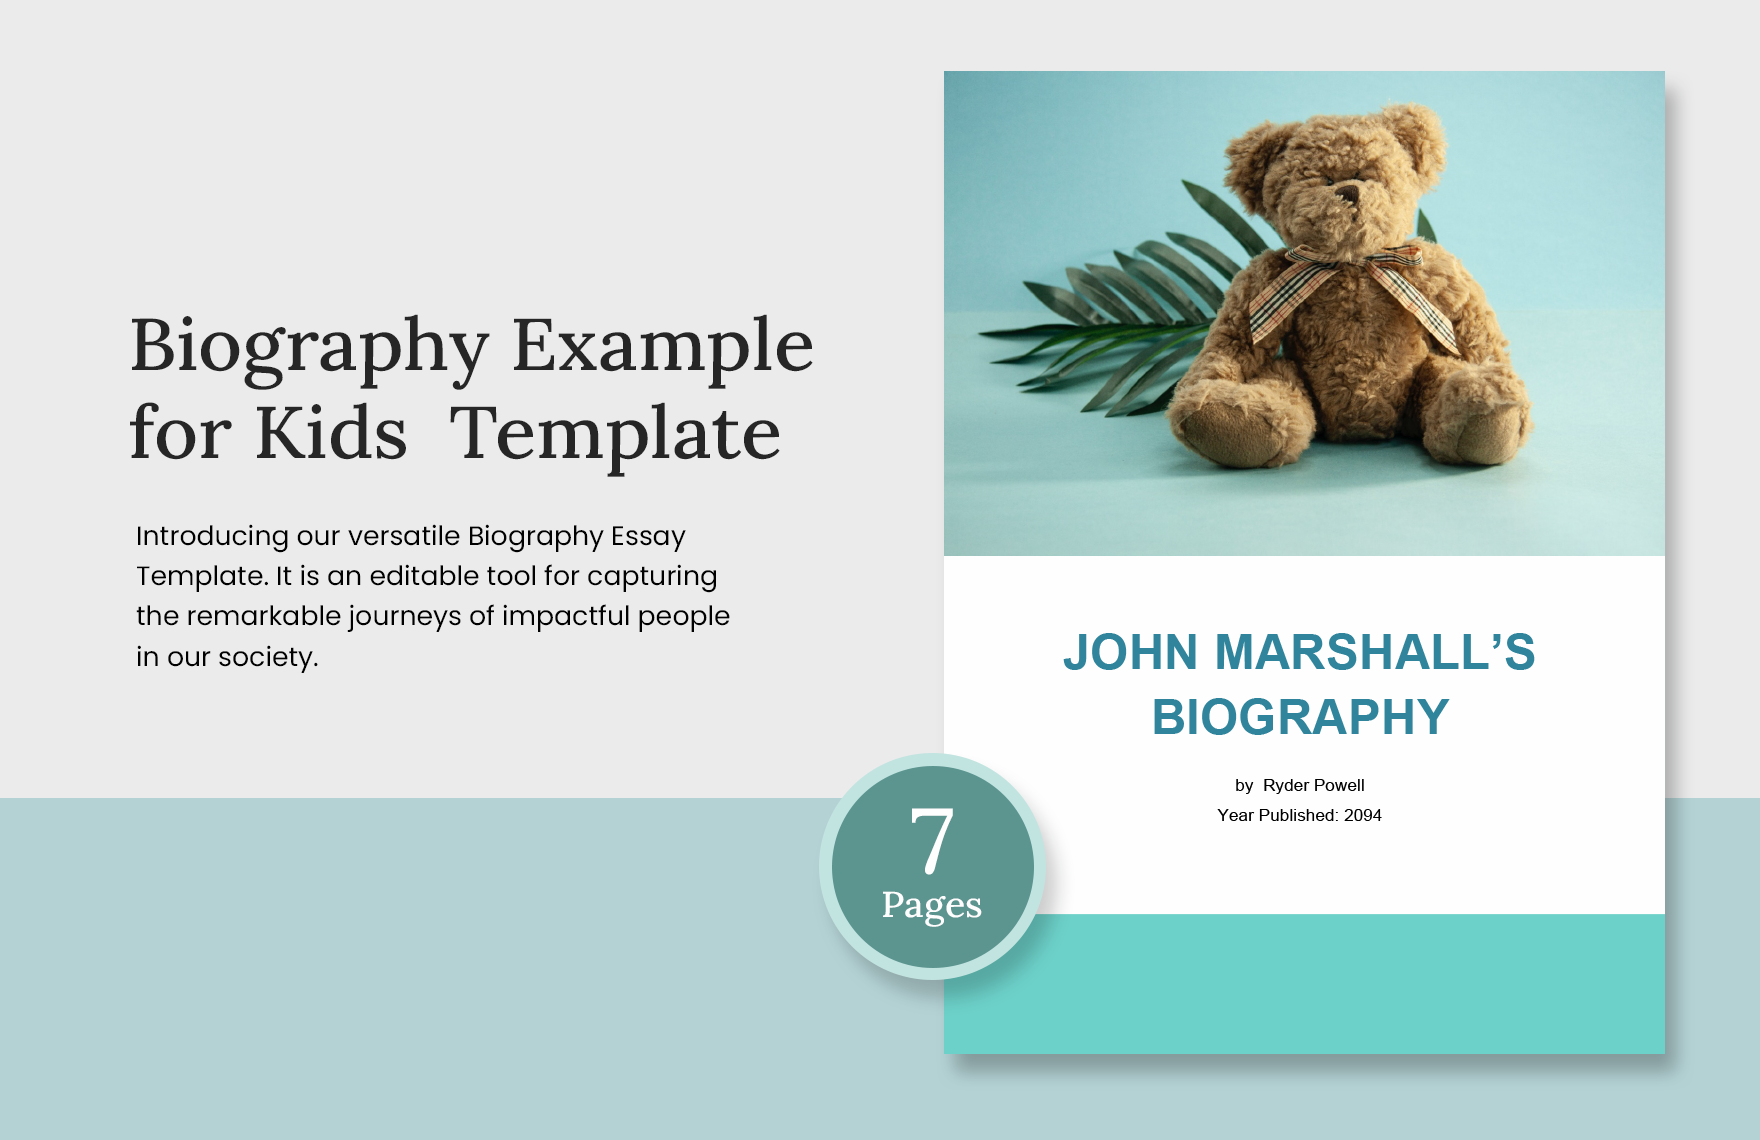 Biography Example for Kids Template